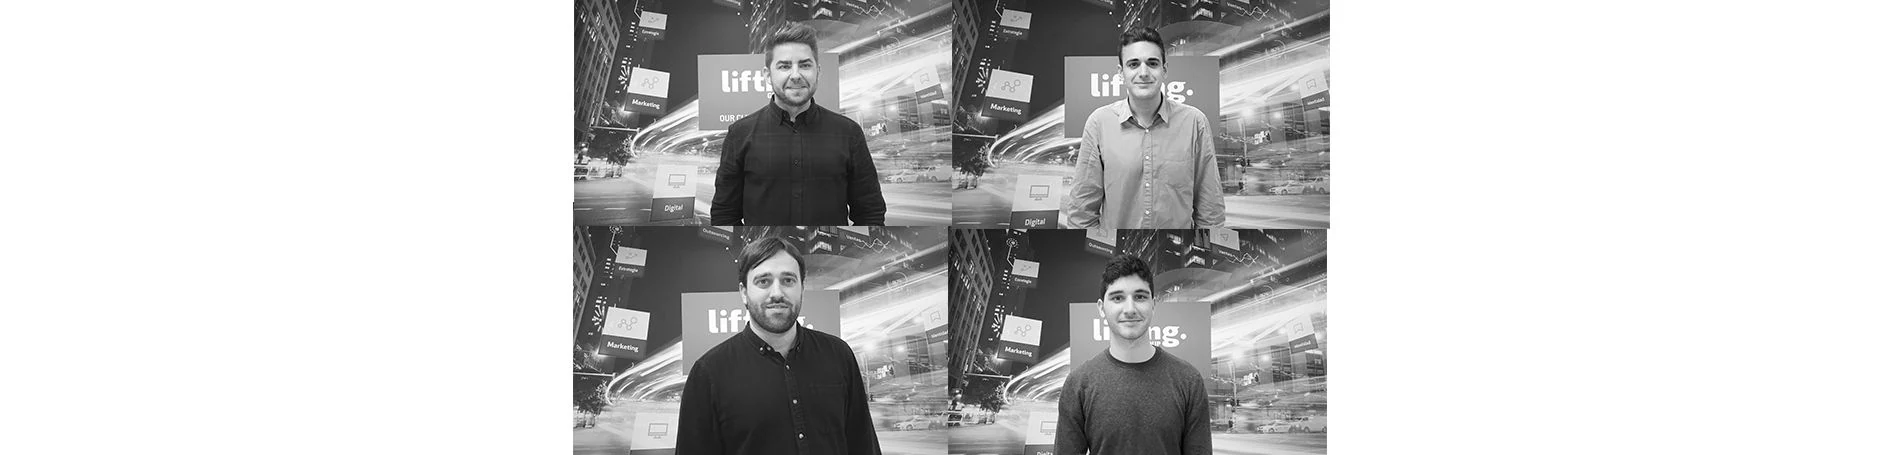 The Lifting Group Barcelona team is strengthened with new recruits